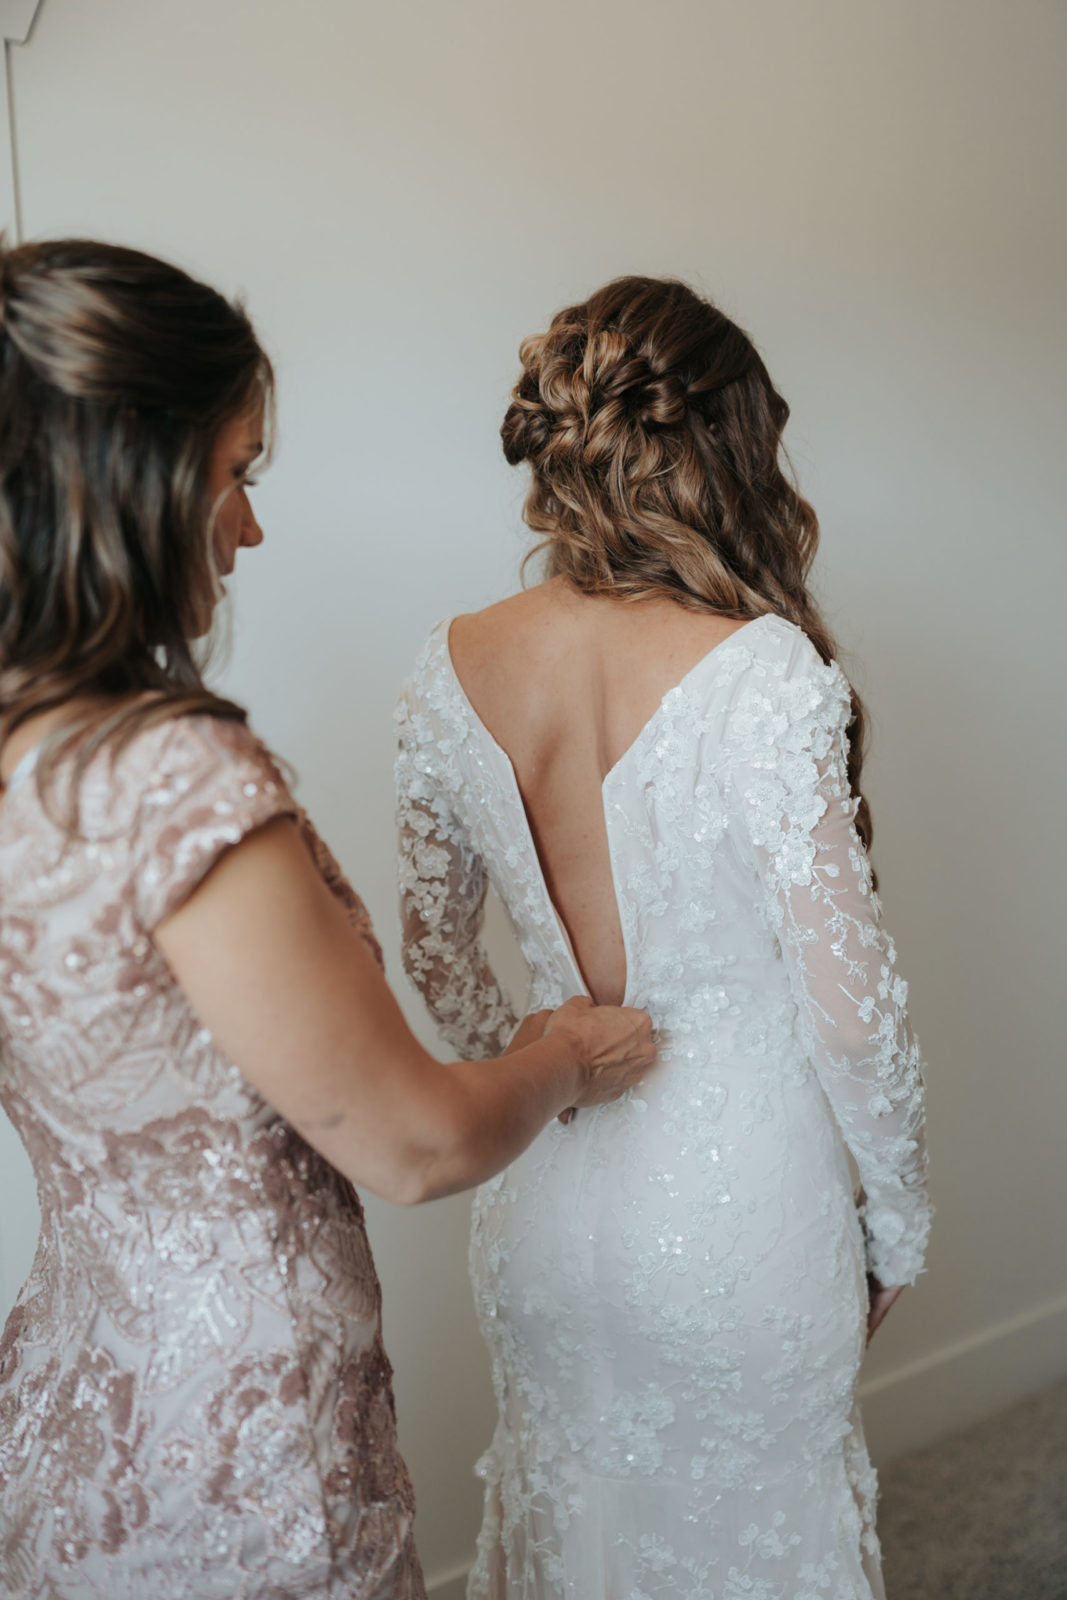 bride getting ready for wedding, floral lace gown